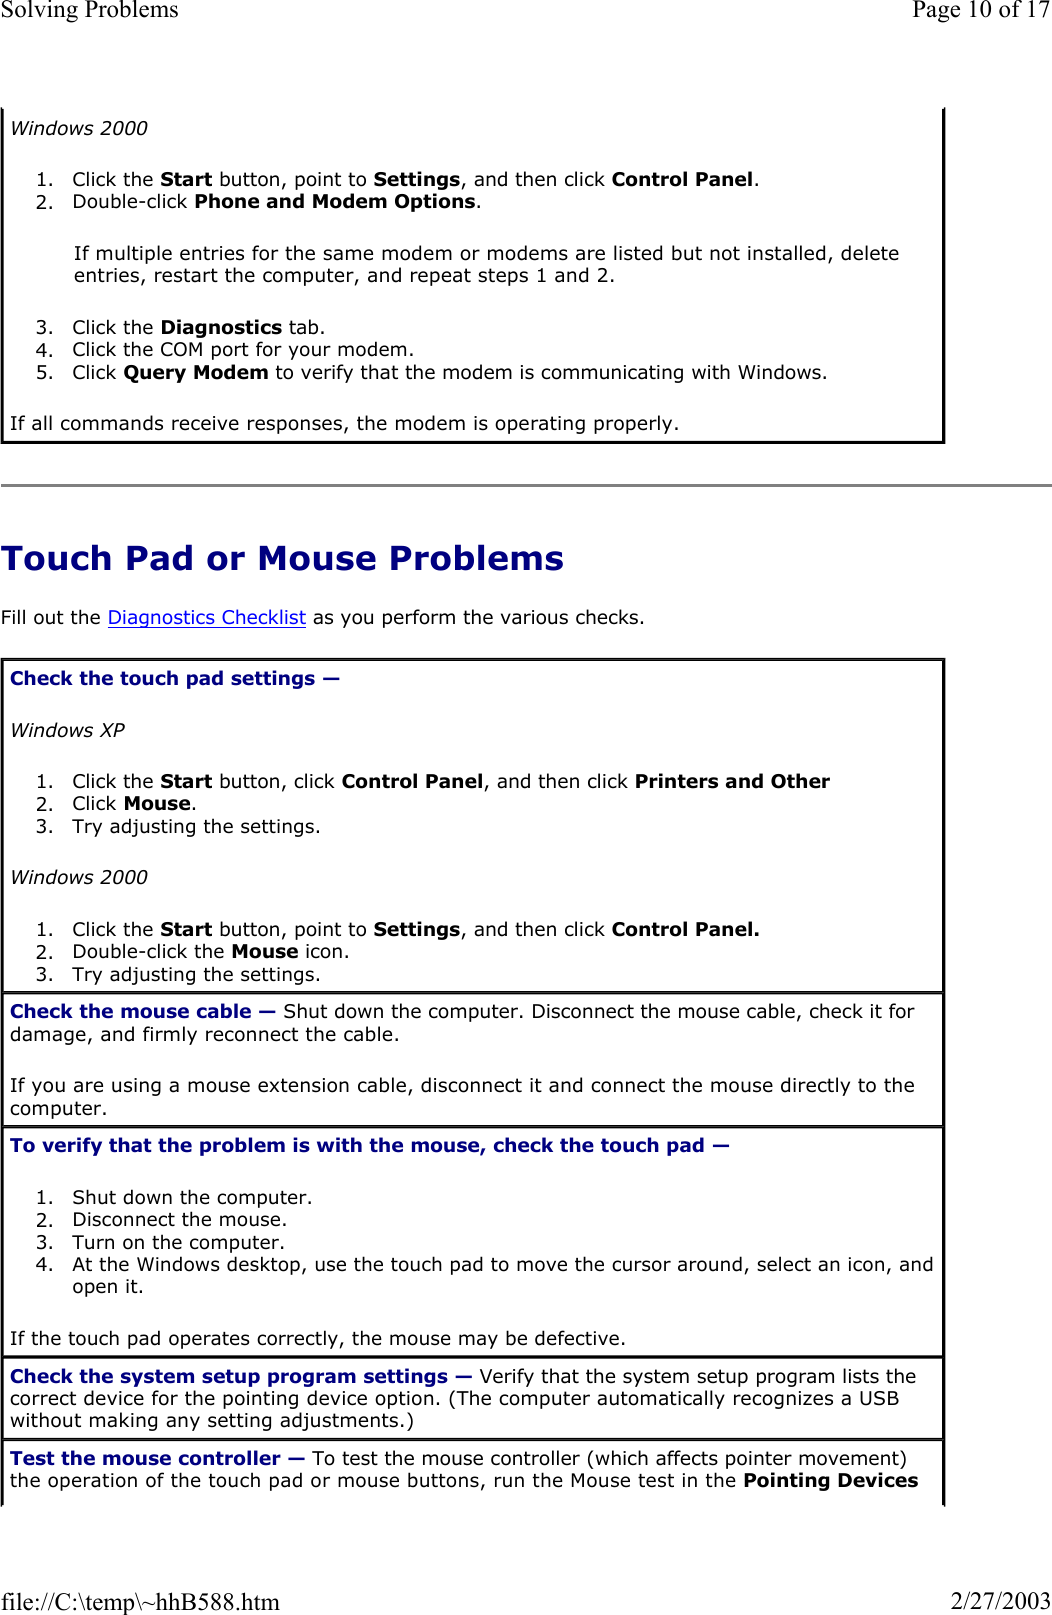 Touch Pad or Mouse Problems Fill out the Diagnostics Checklist as you perform the various checks. Windows 20001. Click the Start button, point to Settings, and then click Control Panel.2. Double-click Phone and Modem Options.If multiple entries for the same modem or modems are listed but not installed, delete entries, restart the computer, and repeat steps 1 and 2. 3. Click the Diagnostics tab.  4. Click the COM port for your modem.  5. Click Query Modem to verify that the modem is communicating with Windows.  If all commands receive responses, the modem is operating properly. Check the touch pad settings —Windows XP1. Click the Start button, click Control Panel, and then click Printers and Other 2. Click Mouse.3. Try adjusting the settings.  Windows 20001. Click the Start button, point to Settings, and then click Control Panel.2. Double-click the Mouse icon.  3. Try adjusting the settings.  Check the mouse cable — Shut down the computer. Disconnect the mouse cable, check it for damage, and firmly reconnect the cable. If you are using a mouse extension cable, disconnect it and connect the mouse directly to the computer. To verify that the problem is with the mouse, check the touch pad —1. Shut down the computer.  2. Disconnect the mouse.  3. Turn on the computer.  4. At the Windows desktop, use the touch pad to move the cursor around, select an icon, and open it.If the touch pad operates correctly, the mouse may be defective. Check the system setup program settings — Verify that the system setup program lists the correct device for the pointing device option. (The computer automatically recognizes a USB without making any setting adjustments.) Test the mouse controller — To test the mouse controller (which affects pointer movement) the operation of the touch pad or mouse buttons, run the Mouse test in the Pointing DevicesPage 10 of 17Solving Problems2/27/2003file://C:\temp\~hhB588.htm